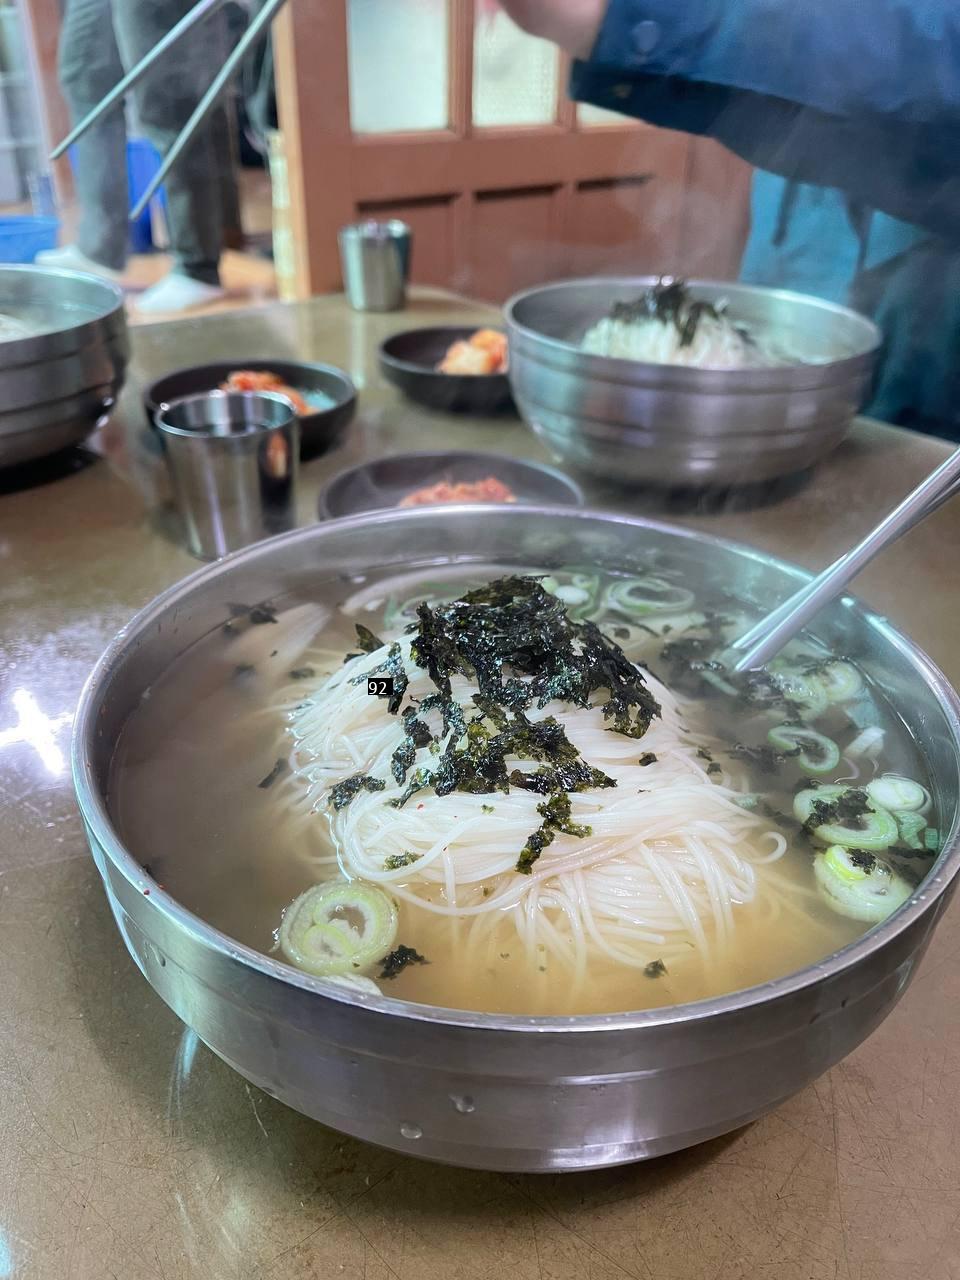 A noodle restaurant with zero complaints in Jikjikyang